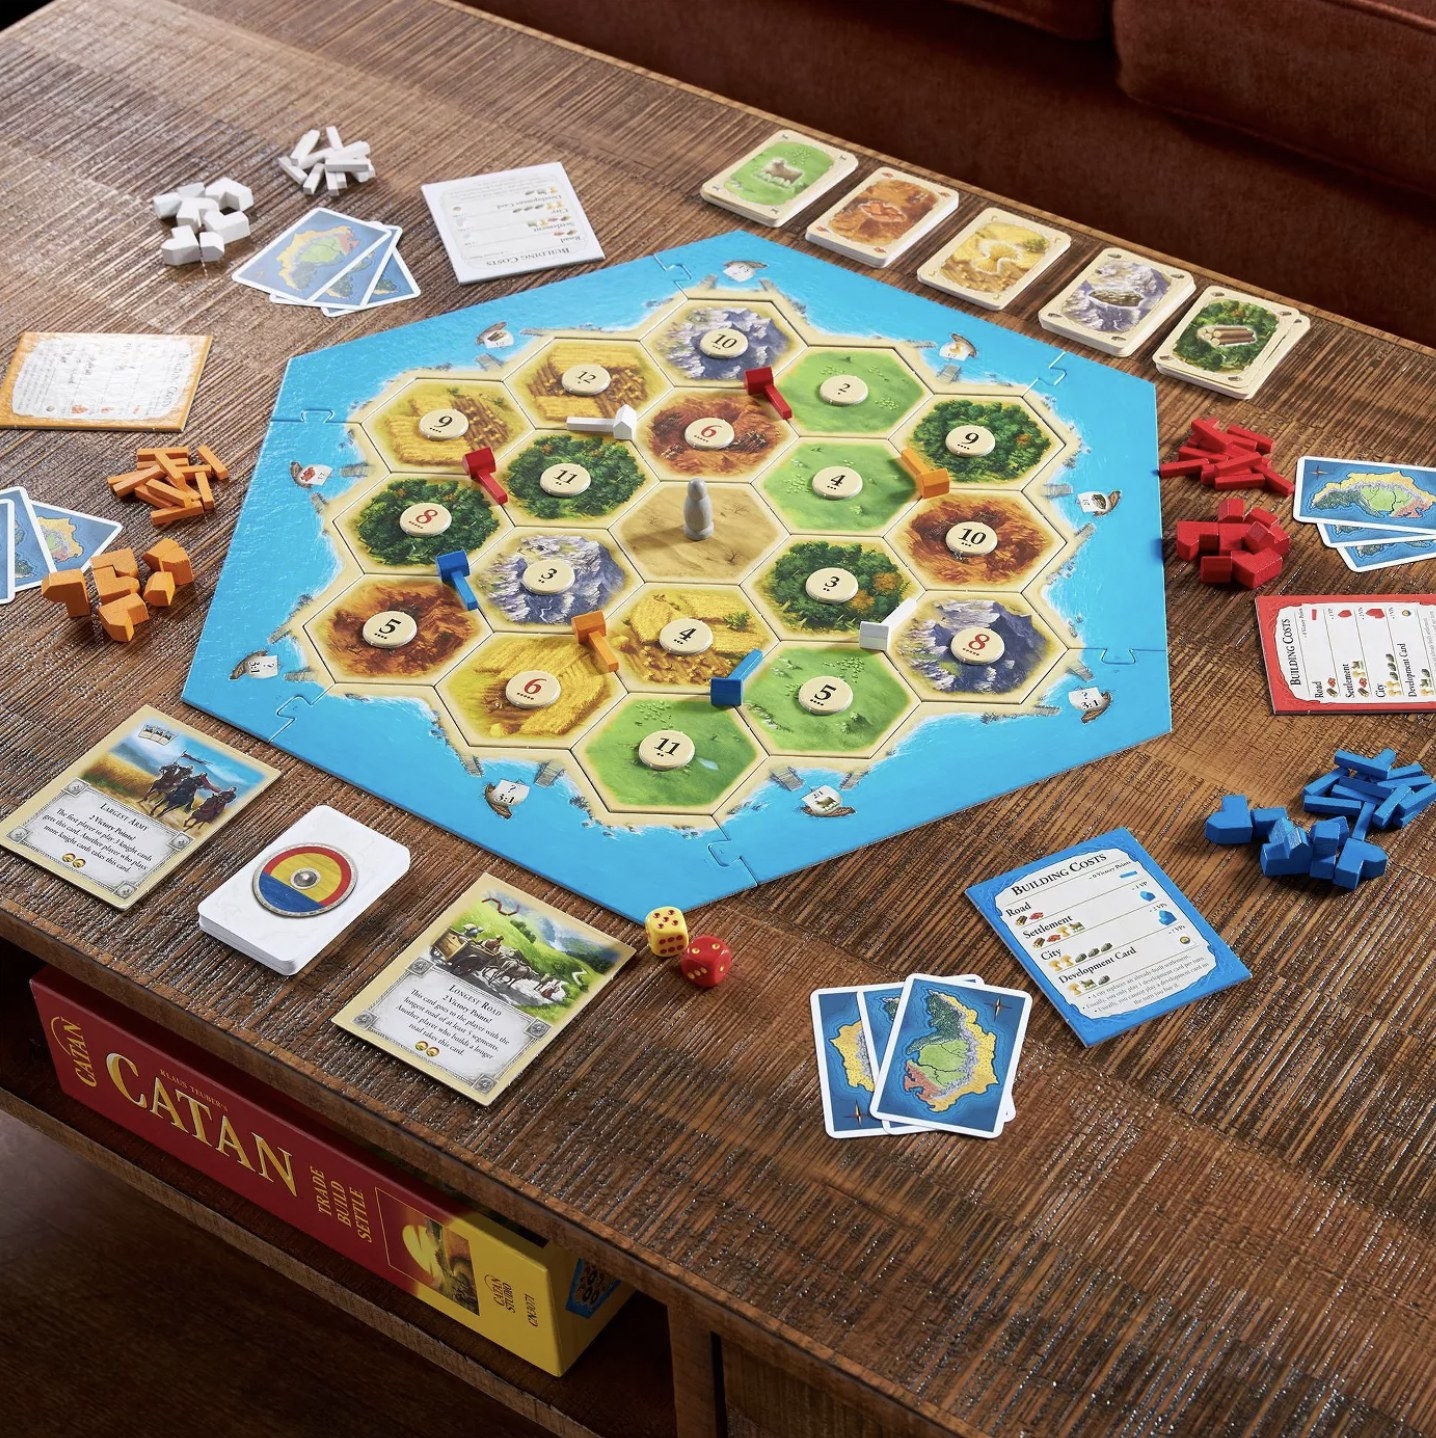 The board game in play